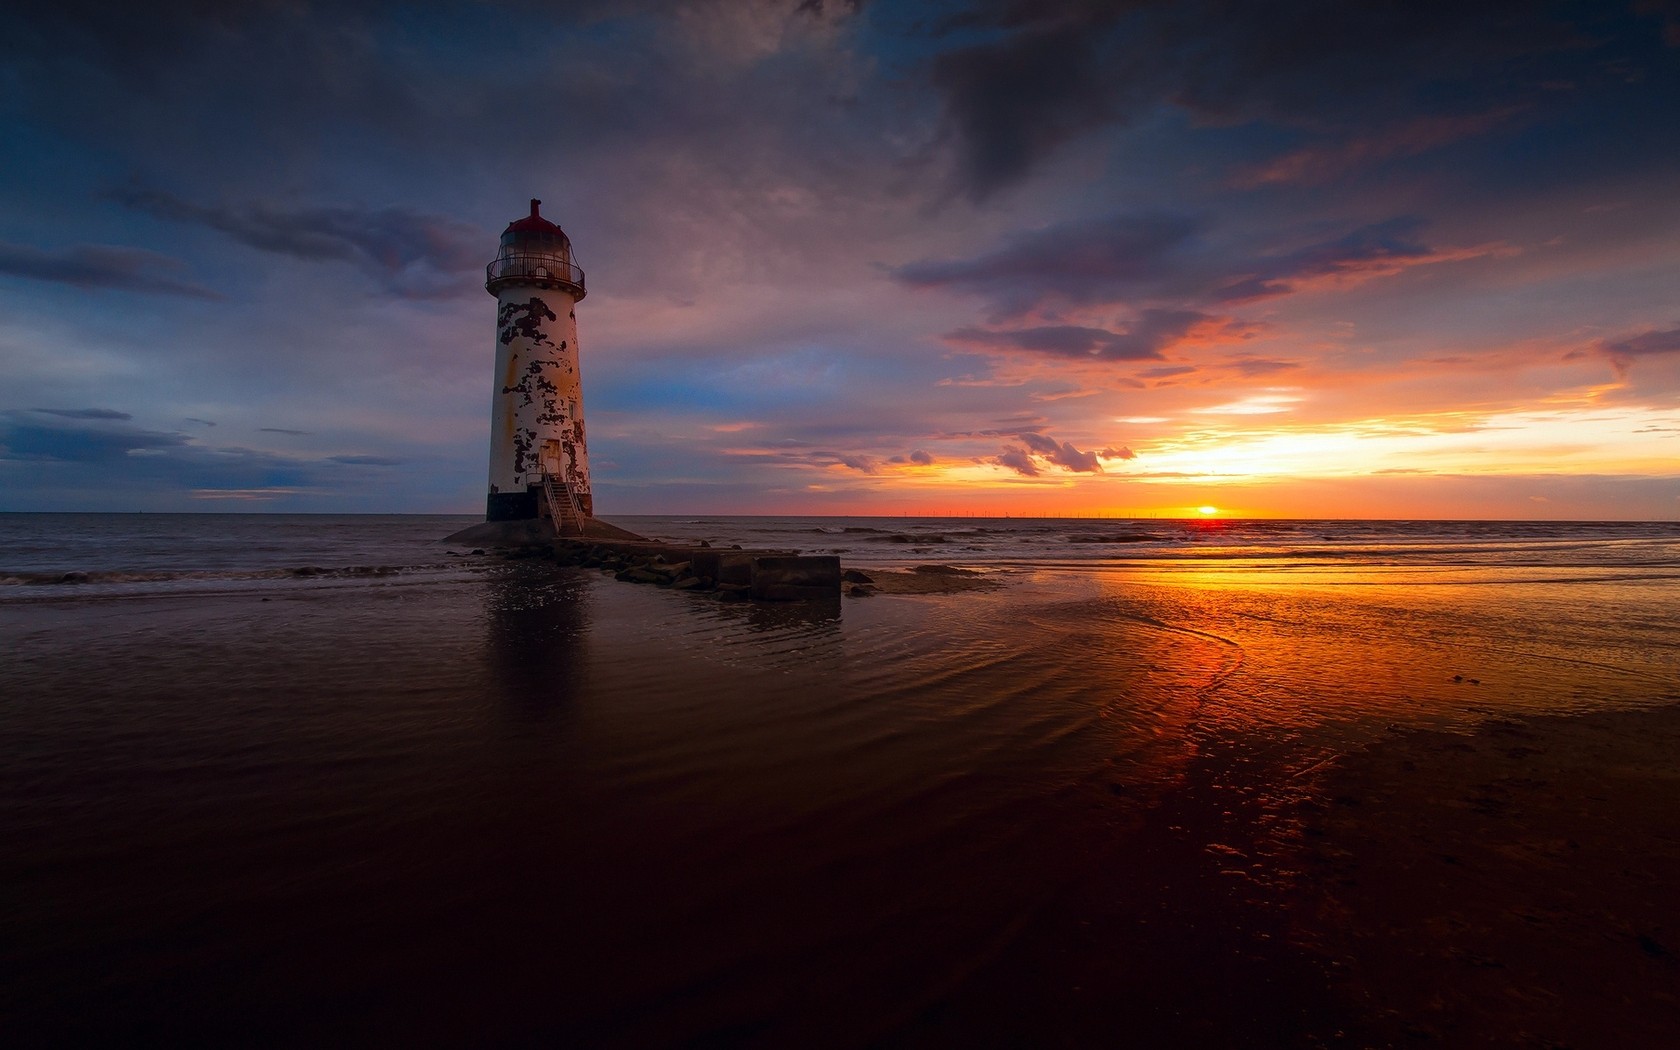 General 1680x1050 lighthouse nature sunset photography depth of field water sand rust sky sunlight outdoors coast low light